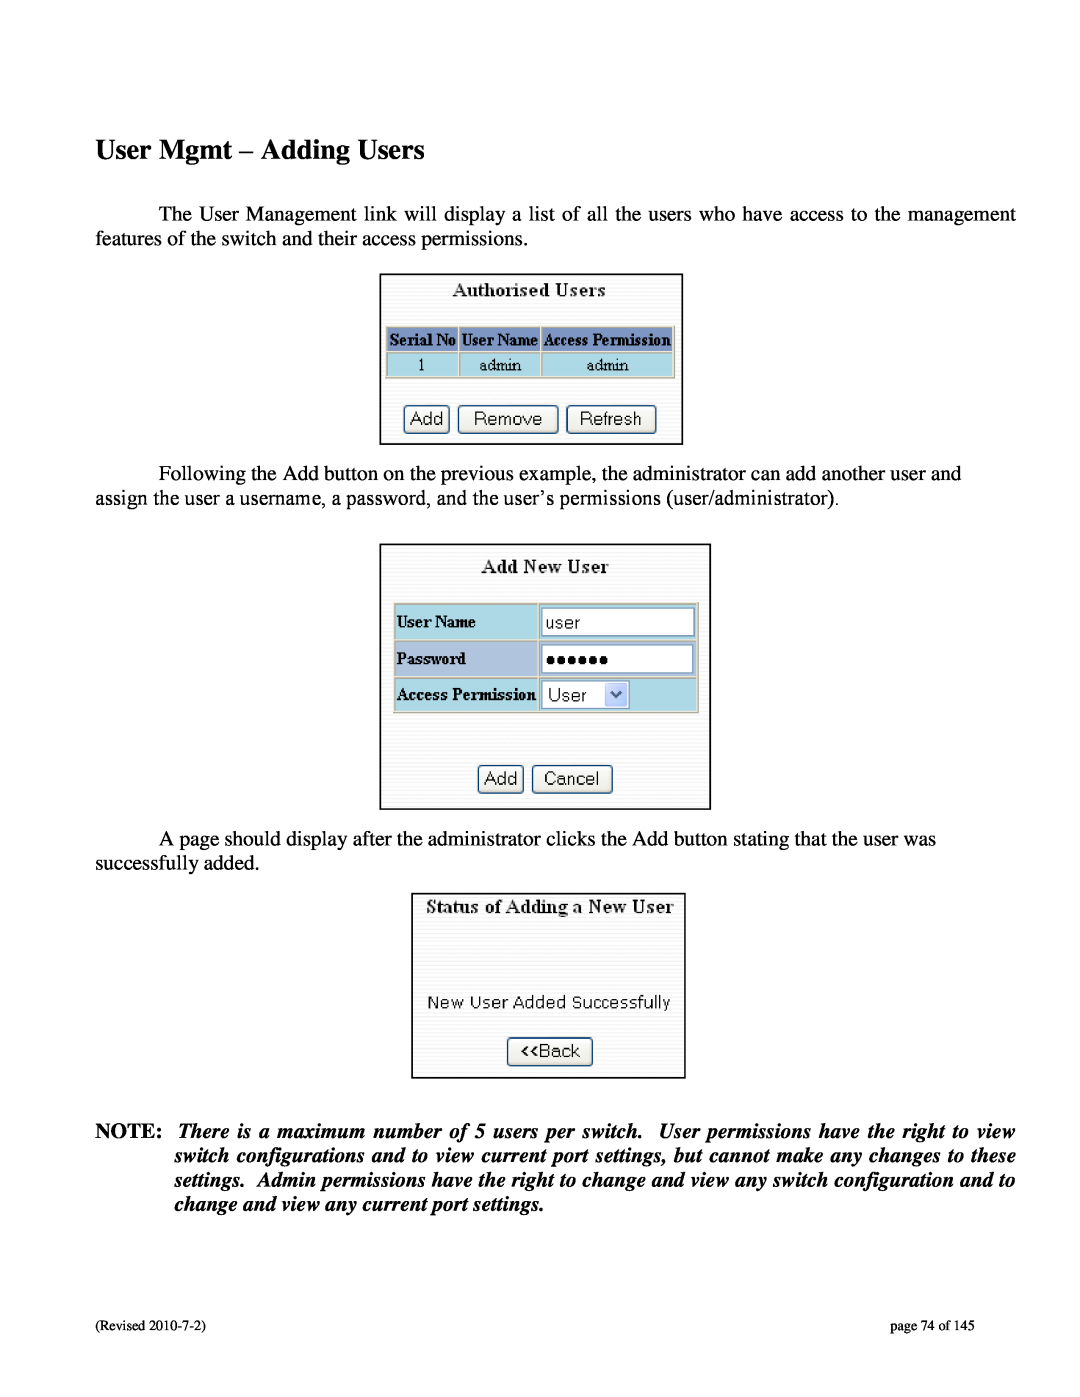 N-Tron 9000 user manual User Mgmt - Adding Users, page 74 of 